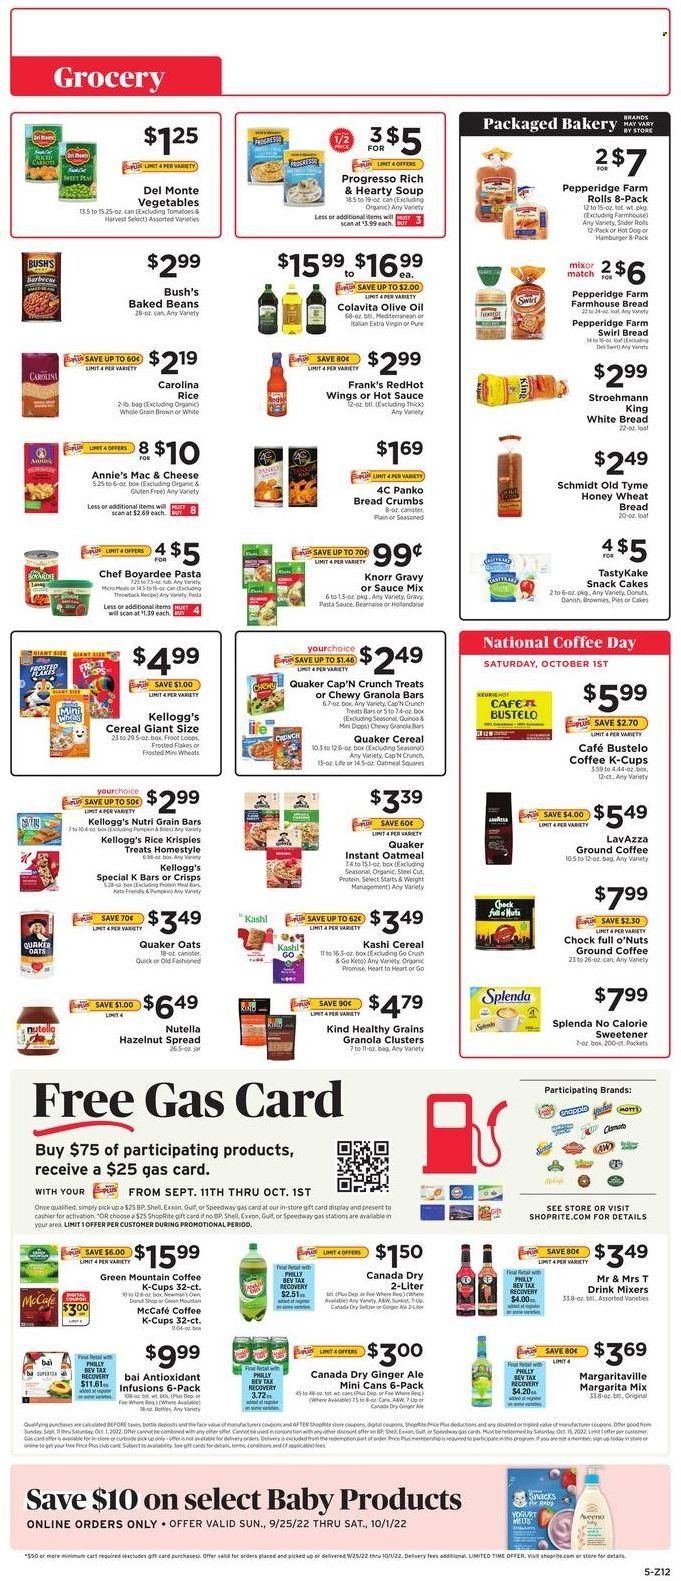 thumbnail - ShopRite Flyer - 09/25/2022 - 10/01/2022 - Sales products - wheat bread, white bread, cake, donut, breadcrumbs, panko breadcrumbs, carrots, hot dog, pasta sauce, soup, hamburger, Knorr, Quaker, Progresso, Annie's, yoghurt, Nutella, snack, Kellogg's, oatmeal, oats, sweetener, baked beans, Chef Boyardee, Del Monte, cereals, granola bar, Rice Krispies, Cap'n Crunch, Frosted Flakes, Nutri-Grain, quinoa, hot sauce, extra virgin olive oil, olive oil, oil, hazelnut spread, Canada Dry, ginger ale, Bai, Margarita Mix, coffee, ground coffee, coffee capsules, McCafe, K-Cups, Lavazza, Green Mountain, canister, jar. Page 5.